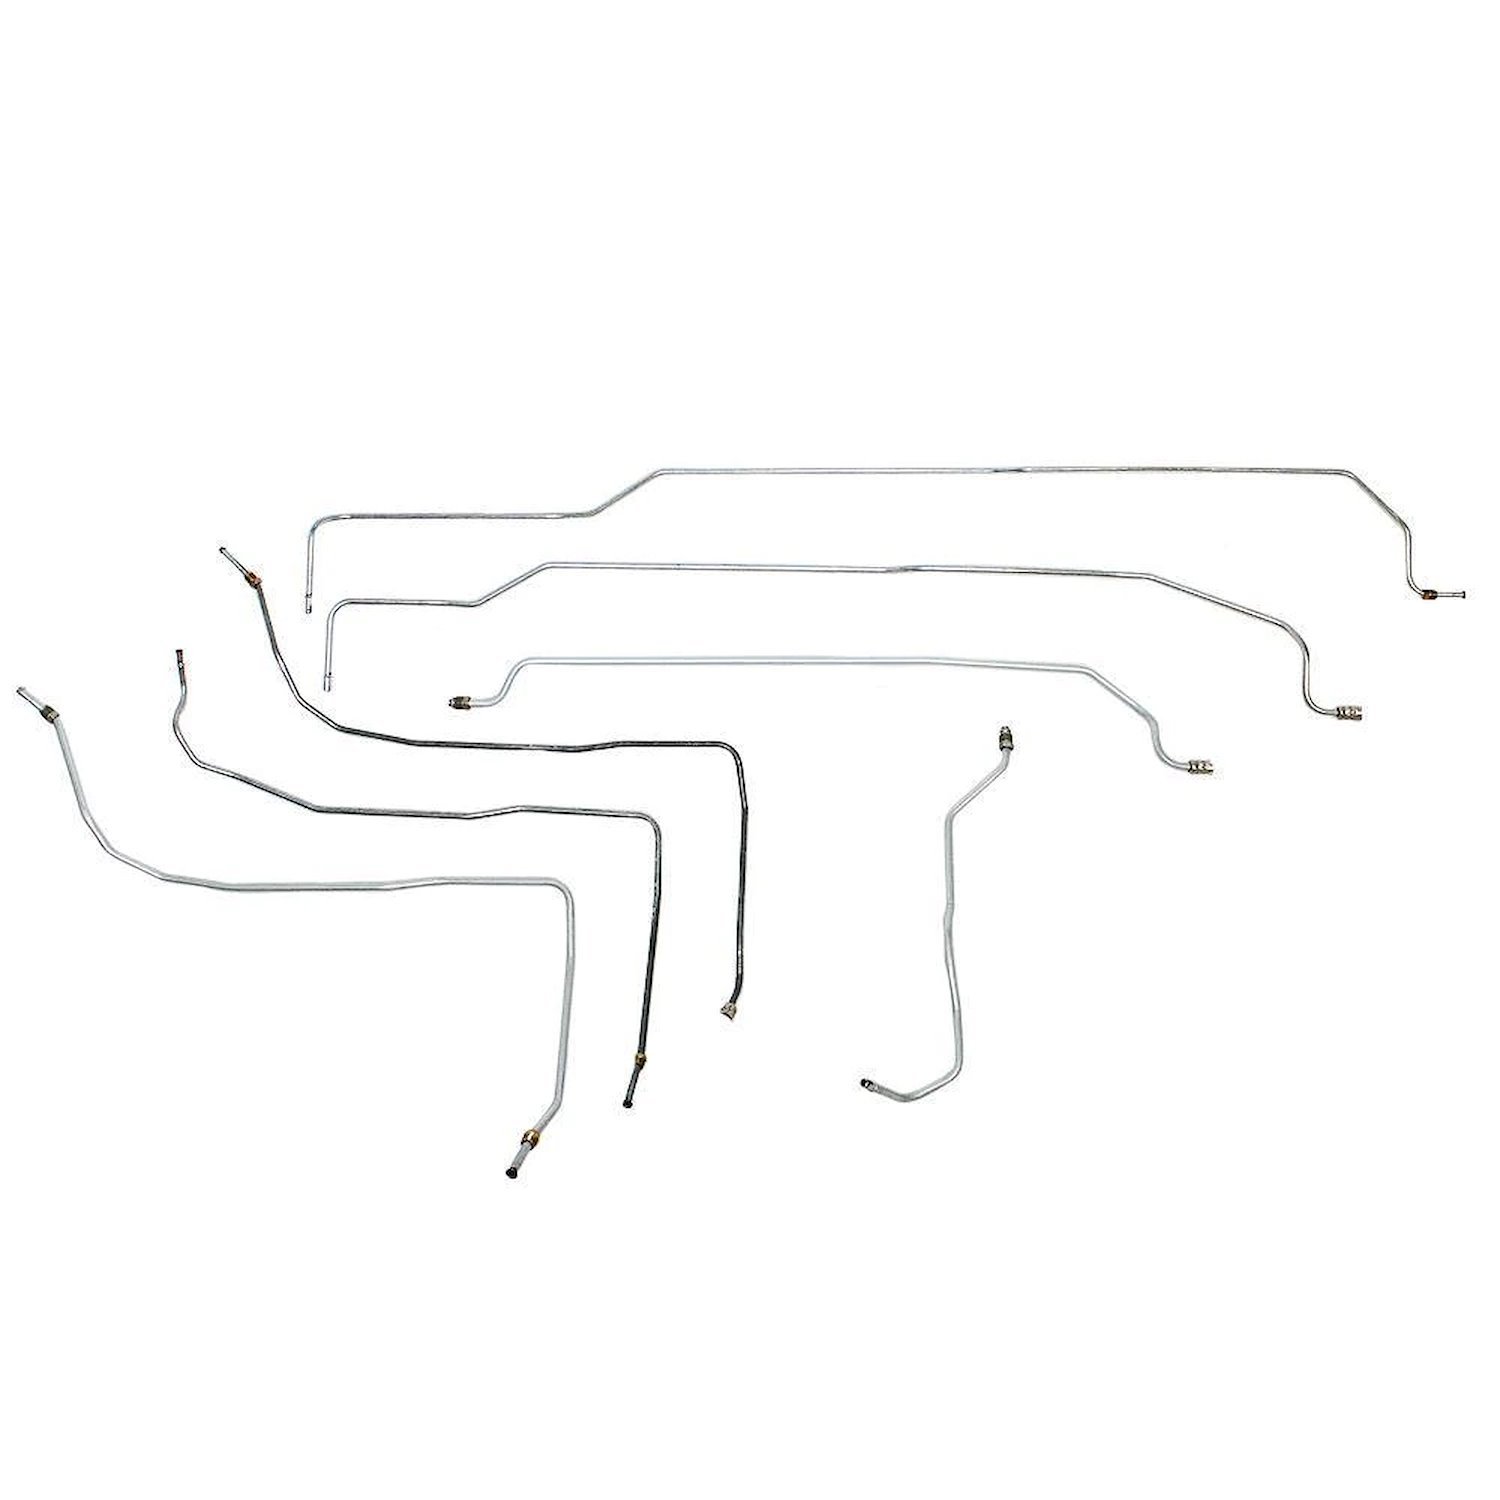 Complete Fuel Line Kit for 2001-2005 Chevy S-10